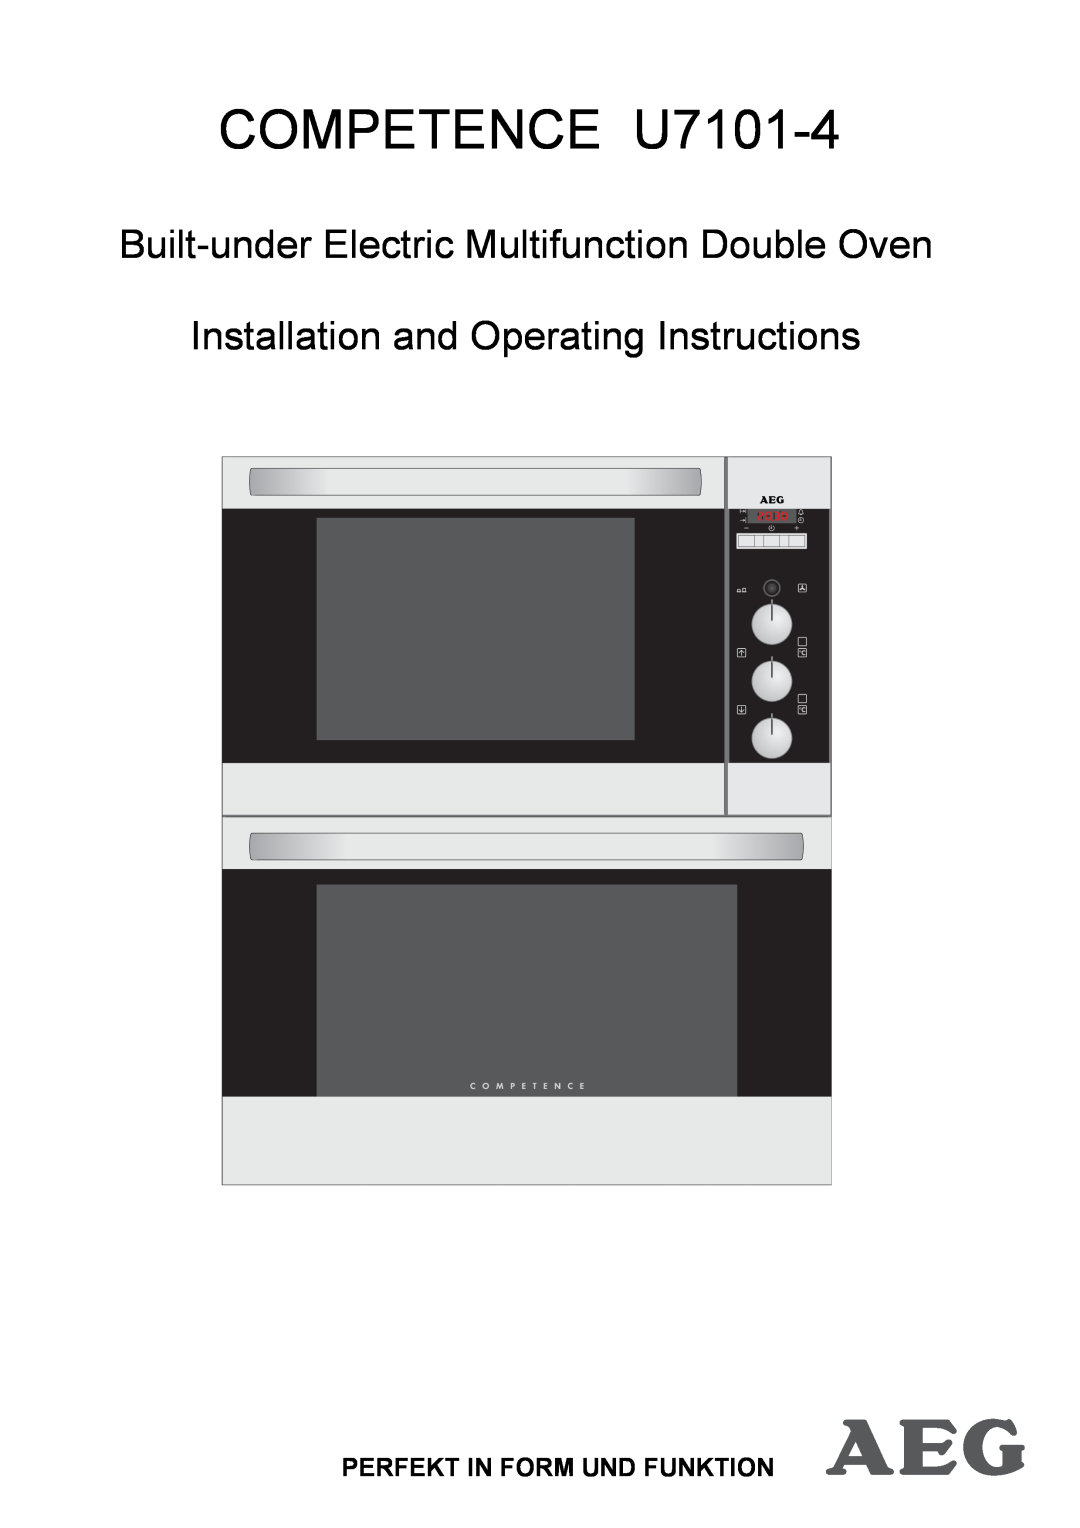 Electrolux operating instructions Perfekt In Form Und Funktion, COMPETENCE U7101-4 